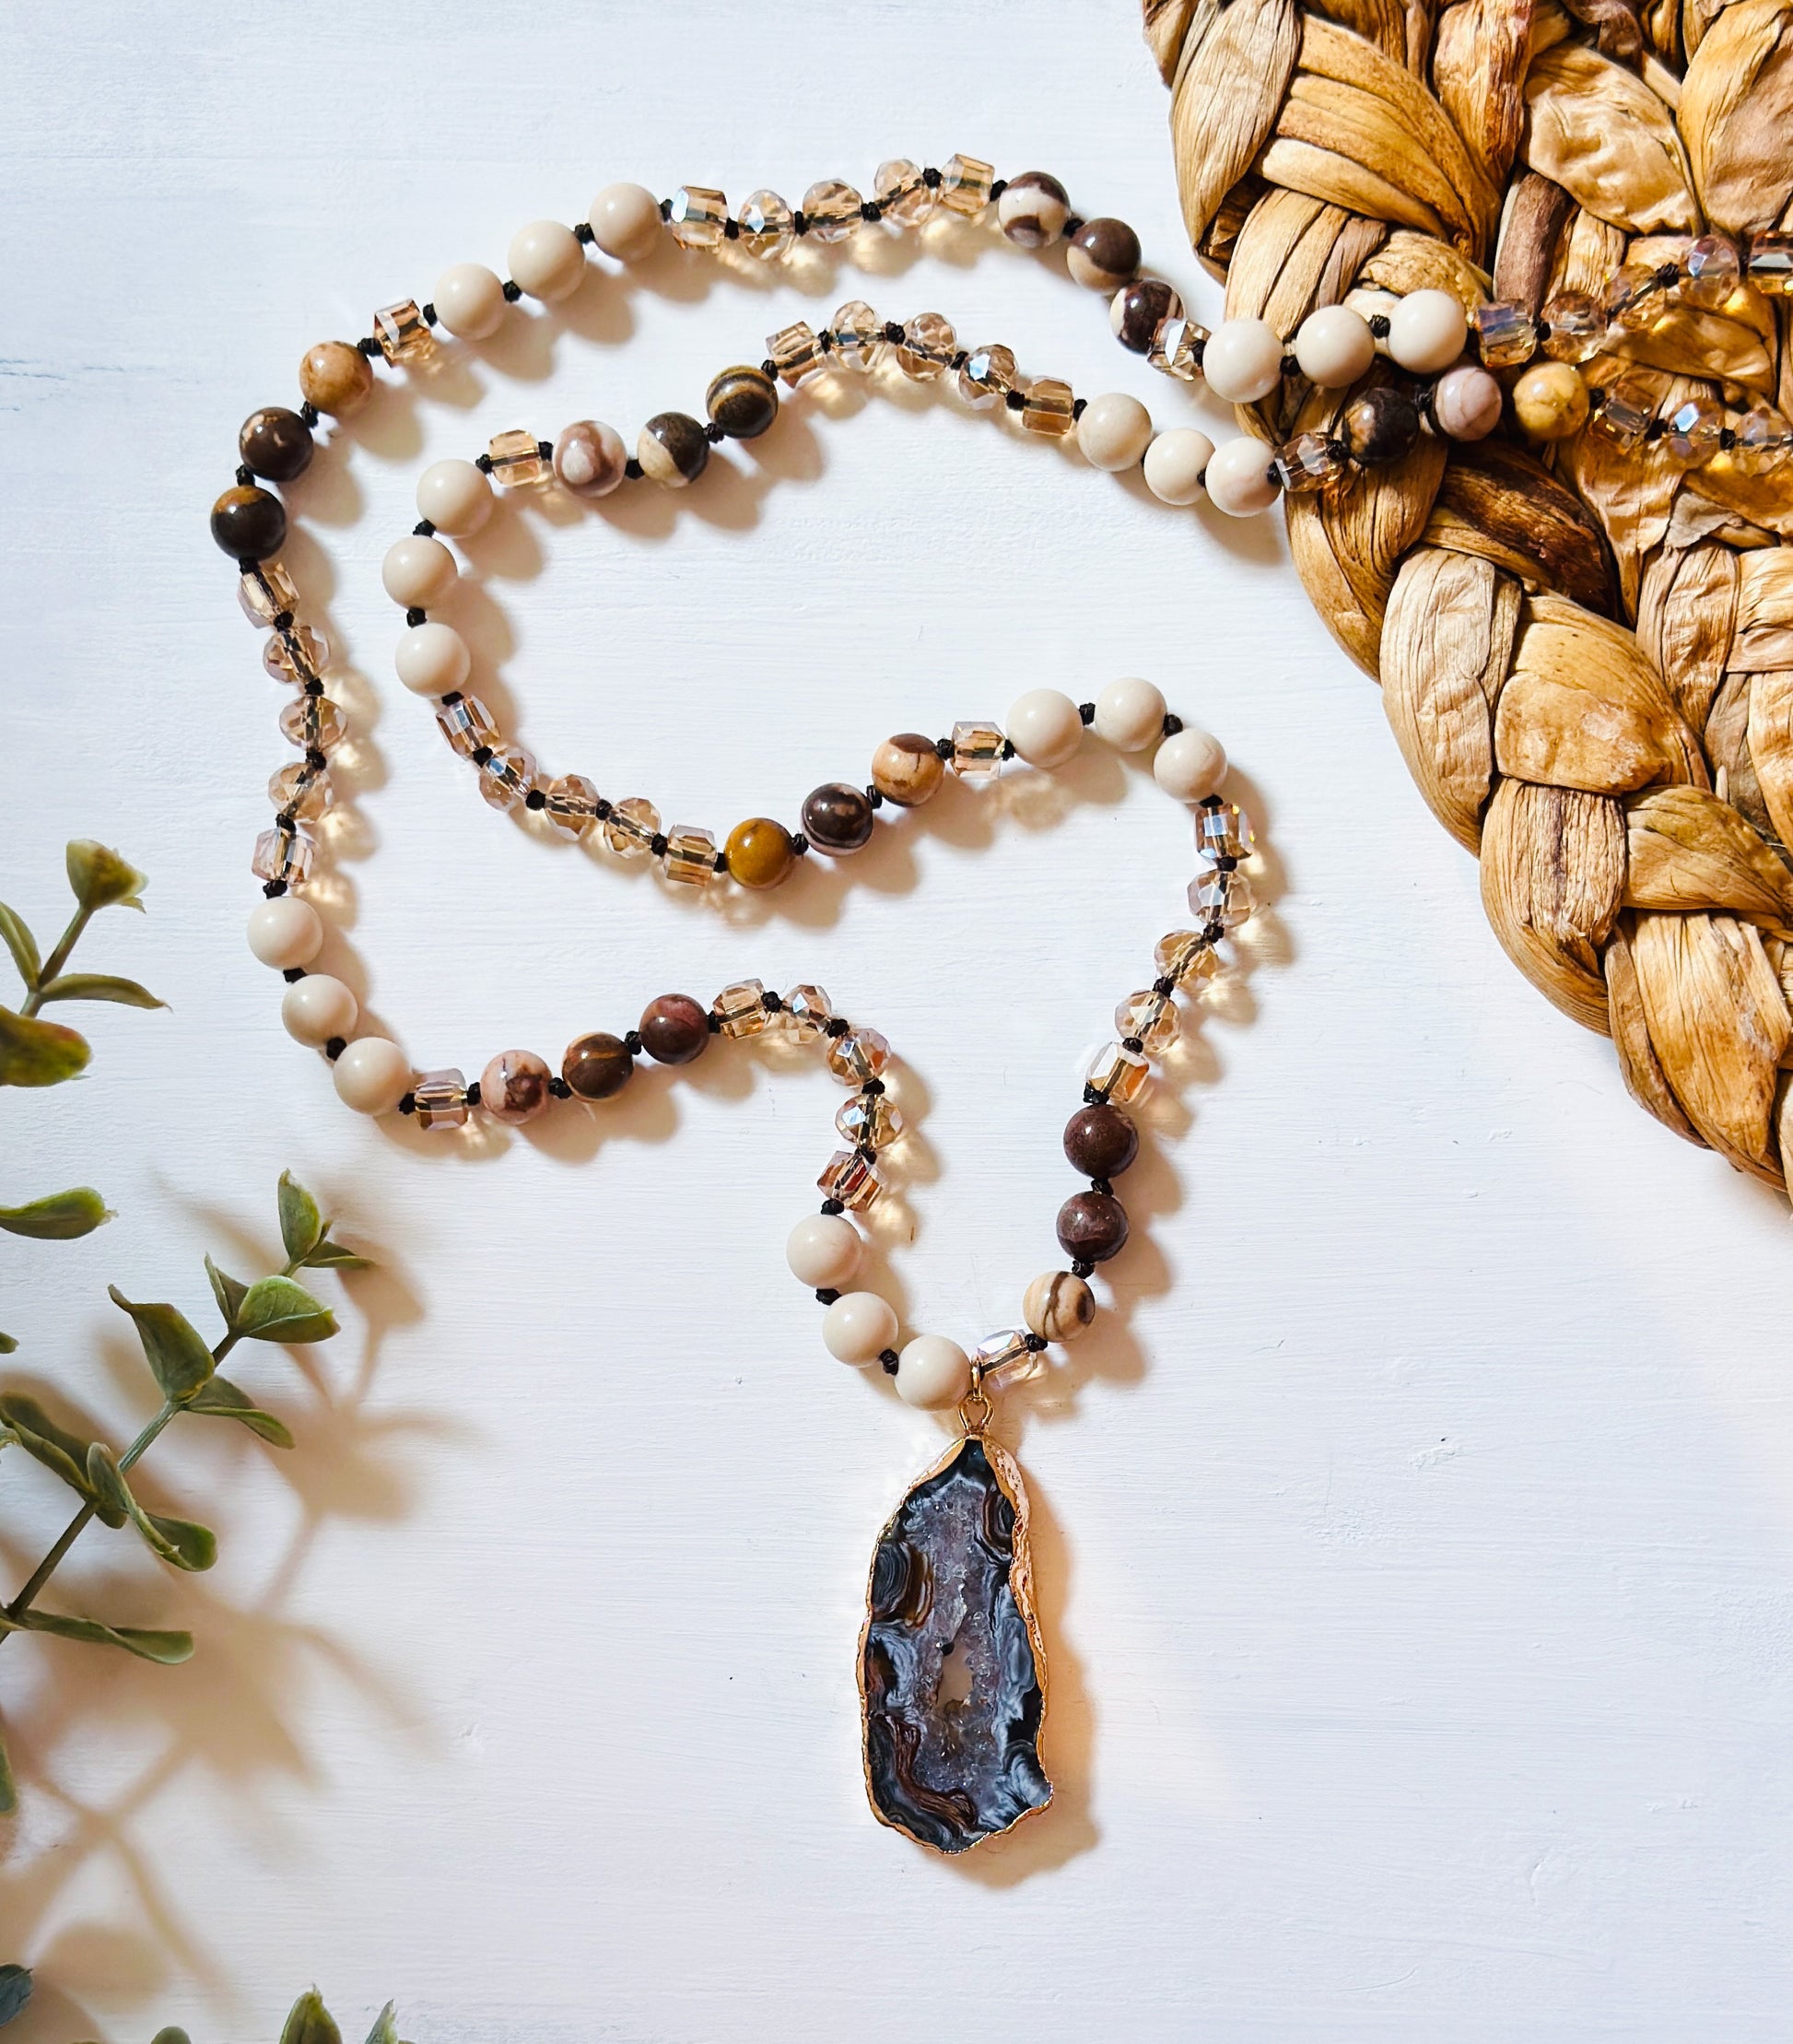 gemstone mala necklace with druzy agate geode pendant